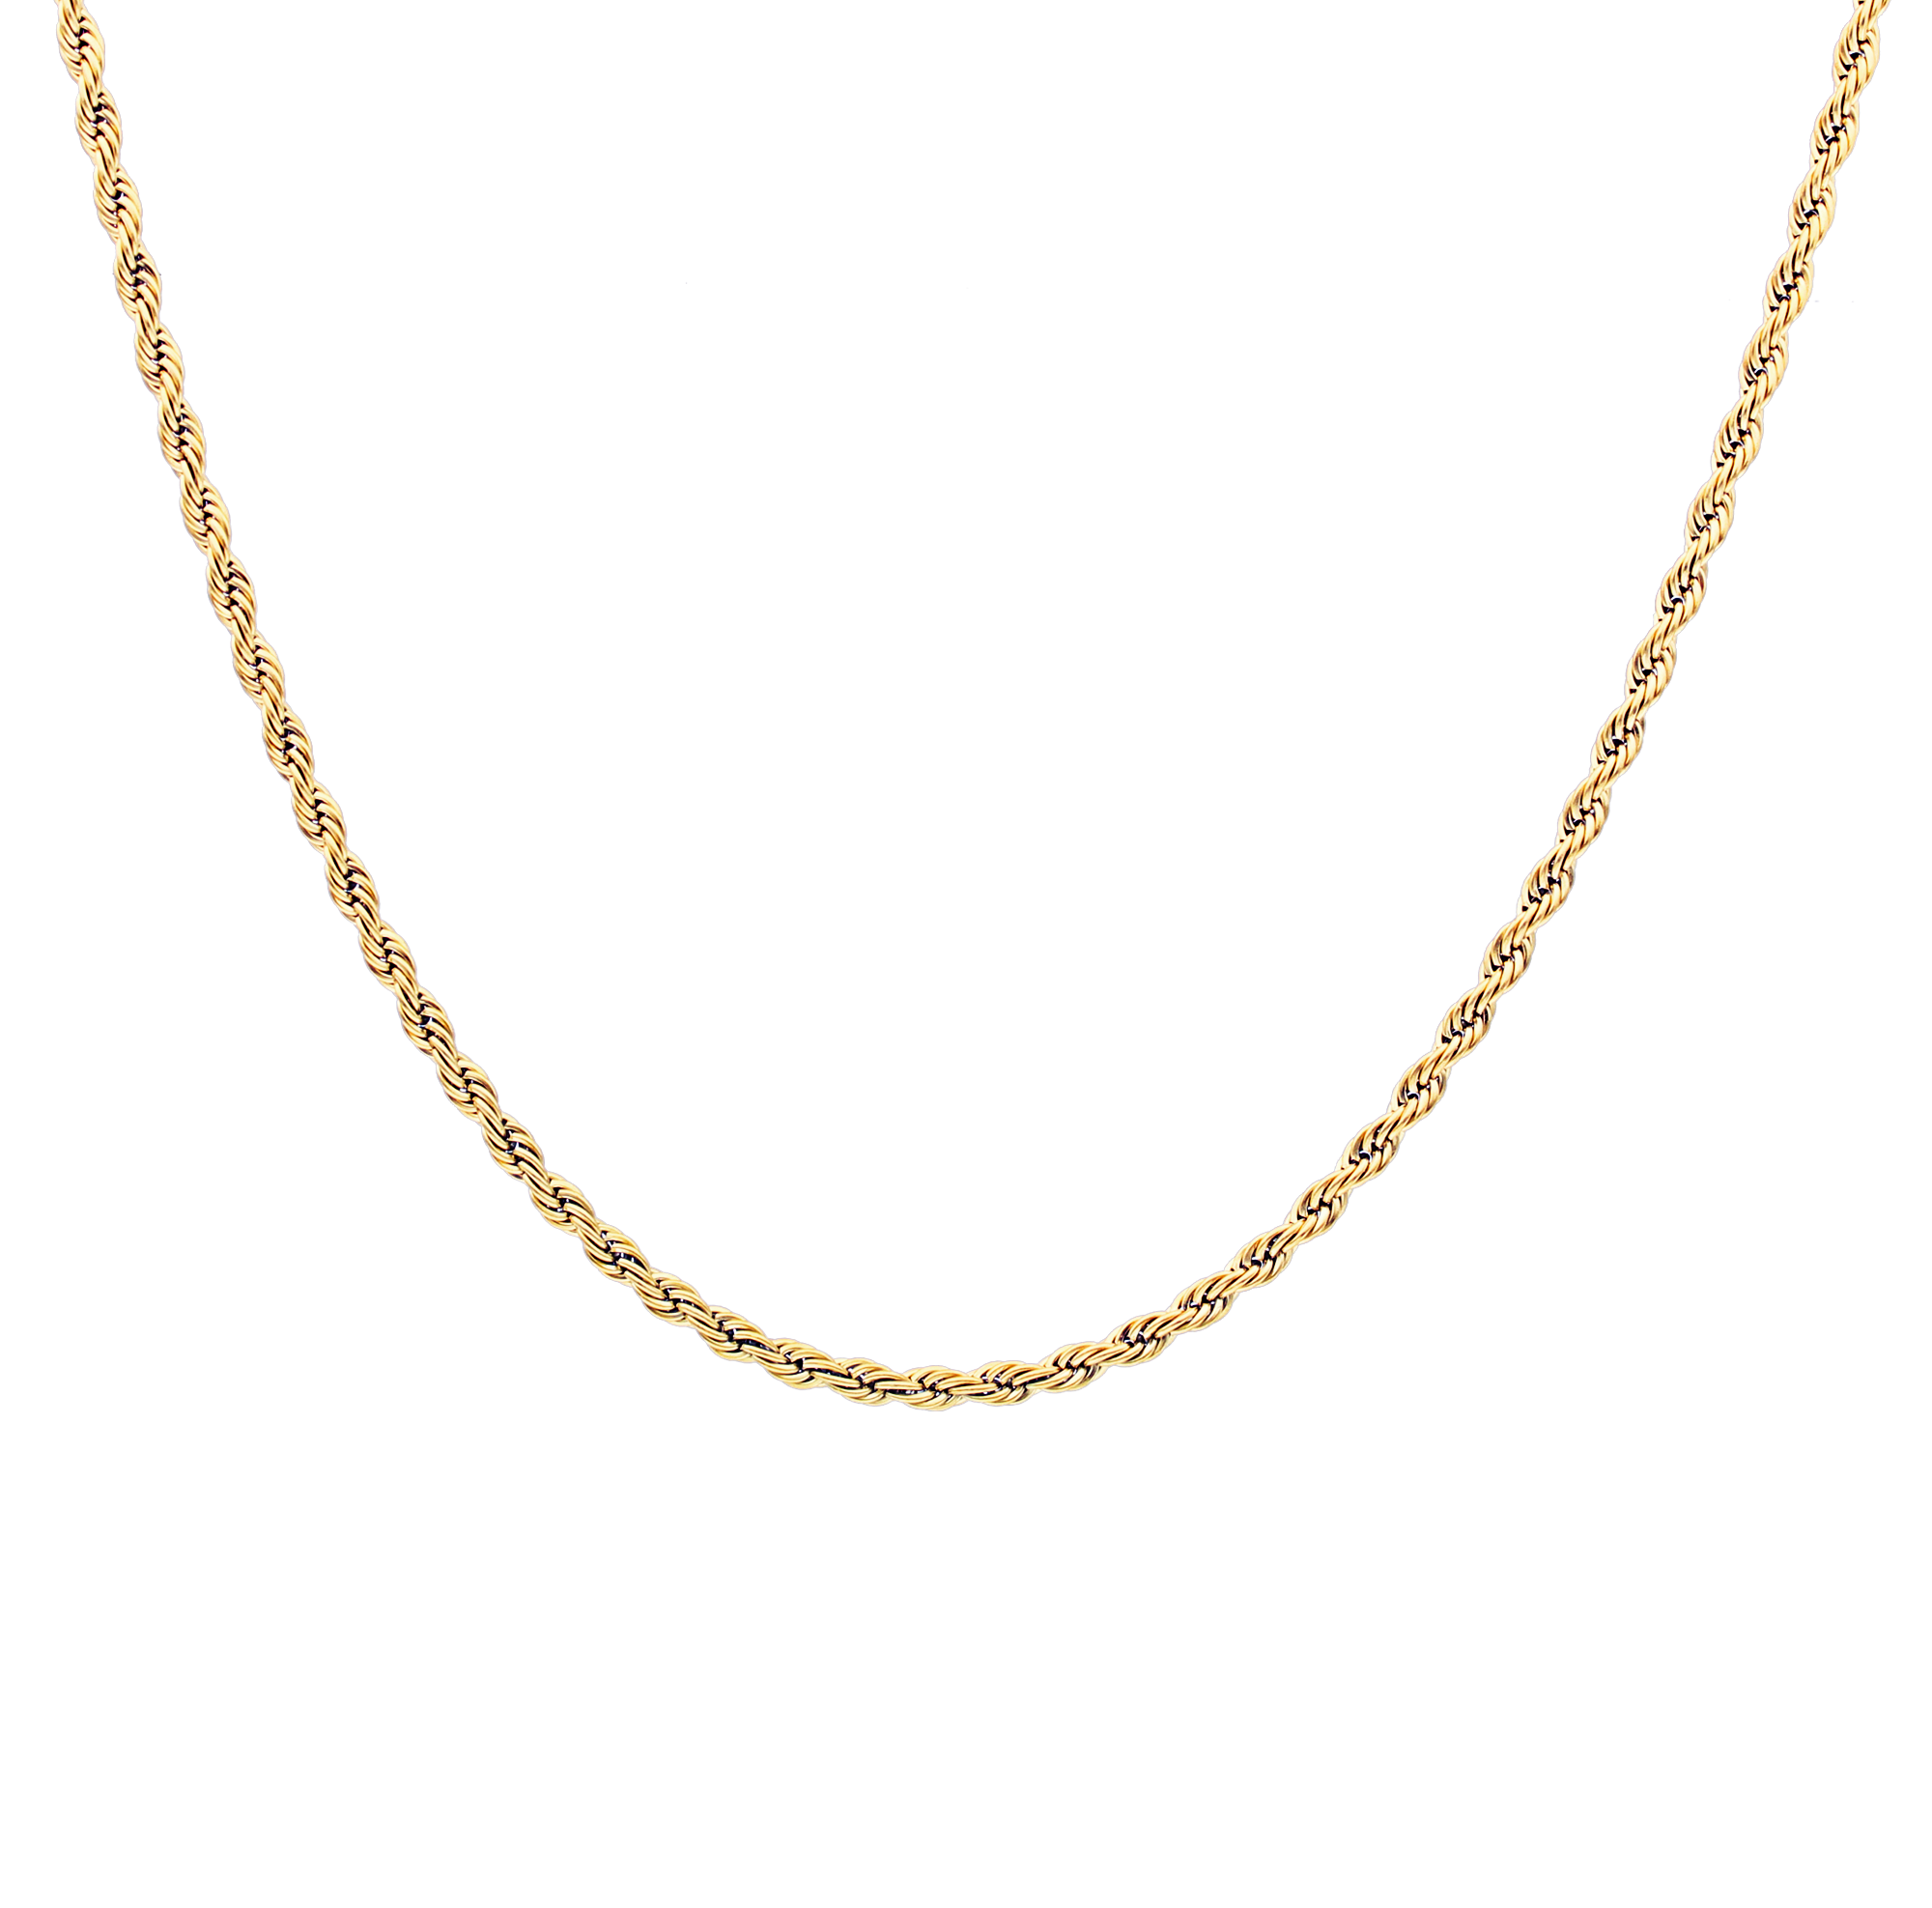 Don men's necklace by Five Jwlry, crafted from a bold 3.5mm French rope twisted chain in gold-colored, water-resistant 316L stainless steel. Available in sizes 45cm, 50cm, 55cm and 65cm. Hypoallergenic with a 2-year warranty.